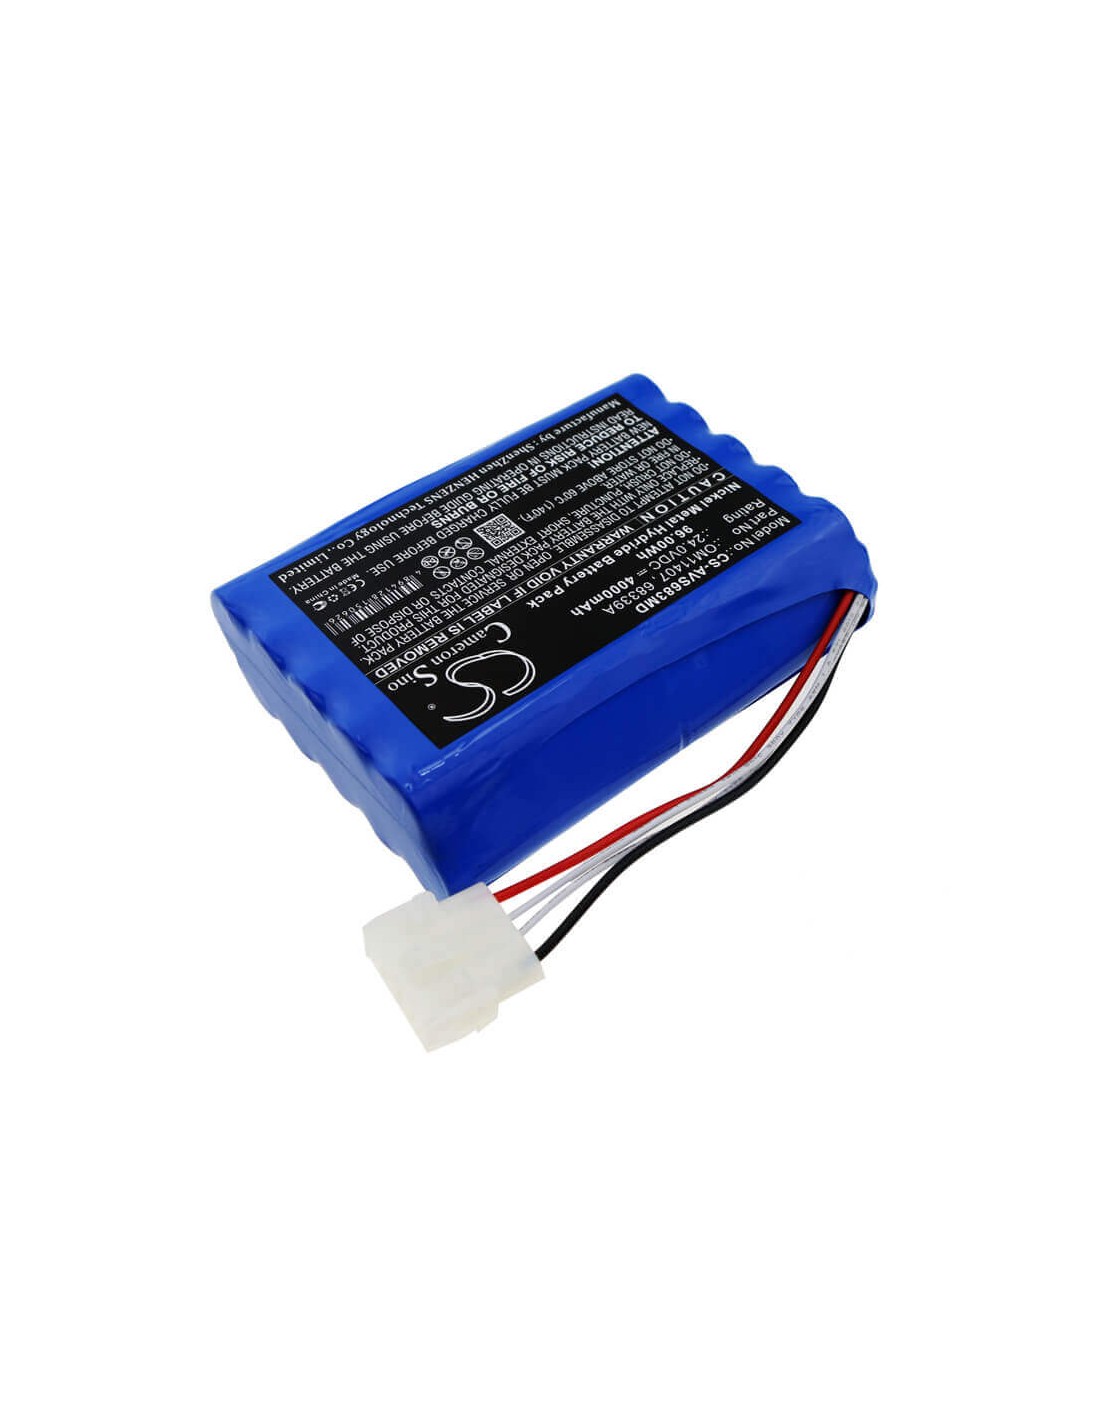 Battery for Viasys Healthcare, 6068, 68339a, 68339k 24V, 4000mAh - 96.00Wh